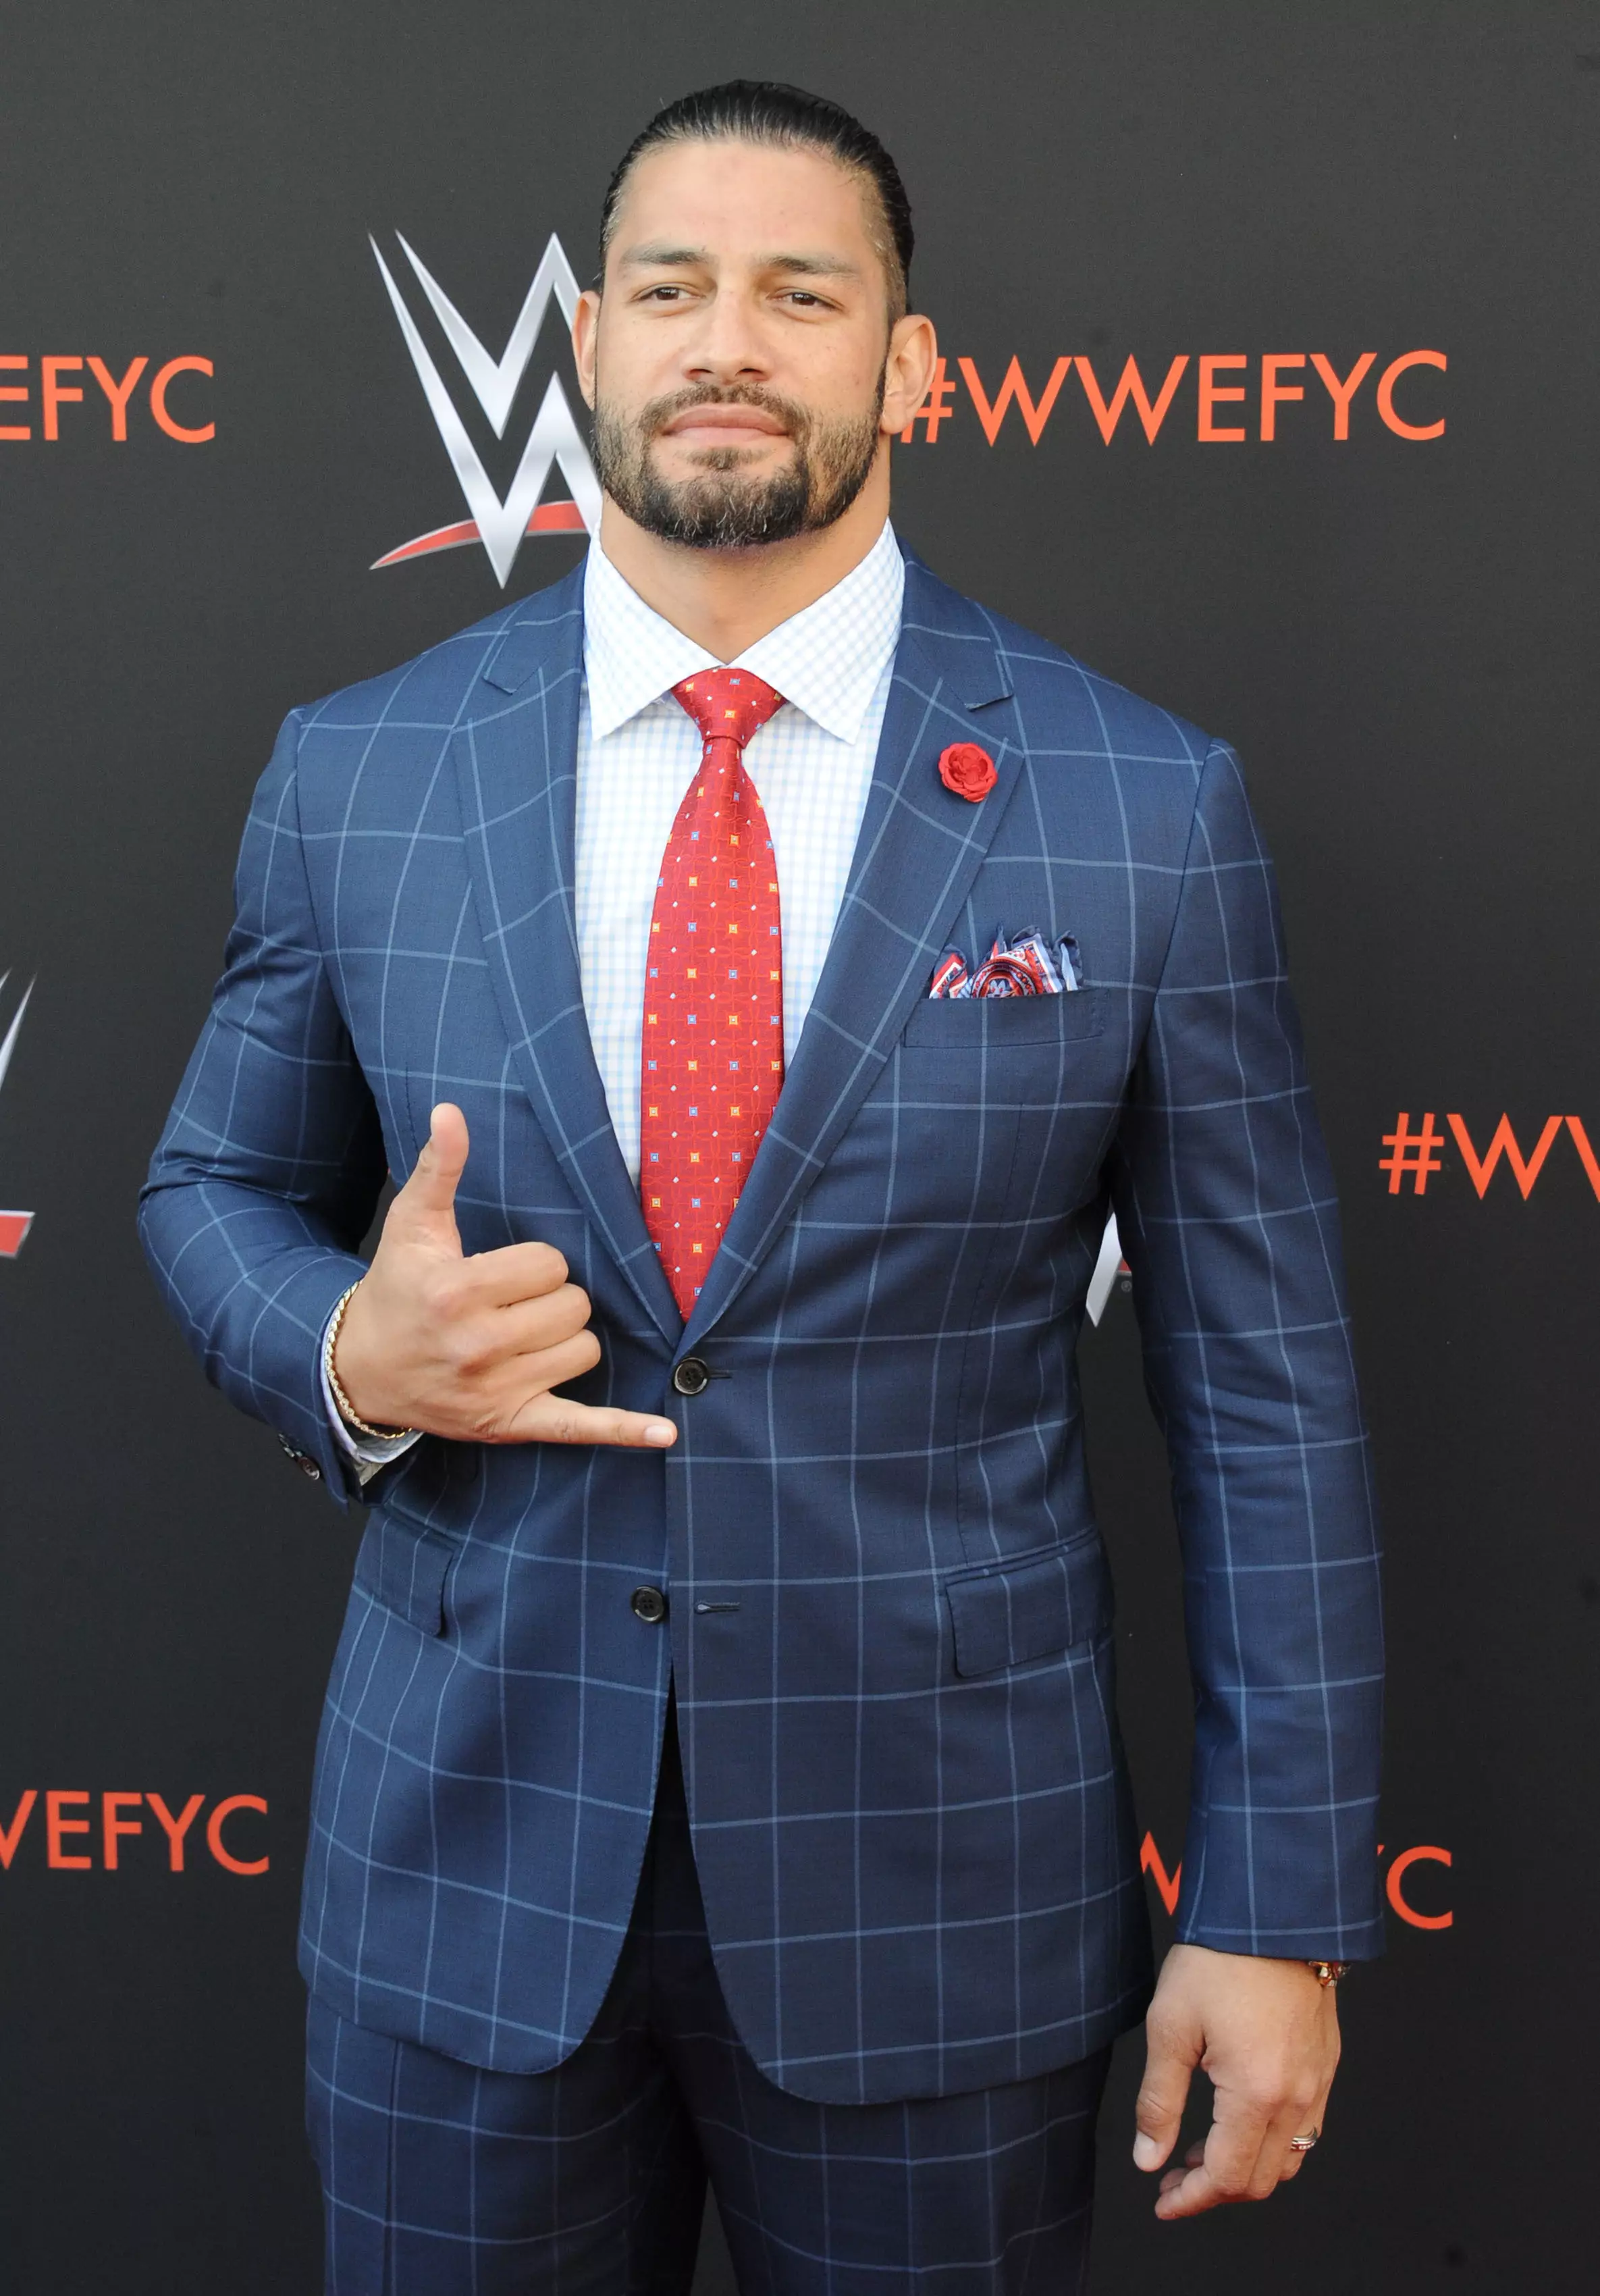 Roman Reigns at a WWE event.